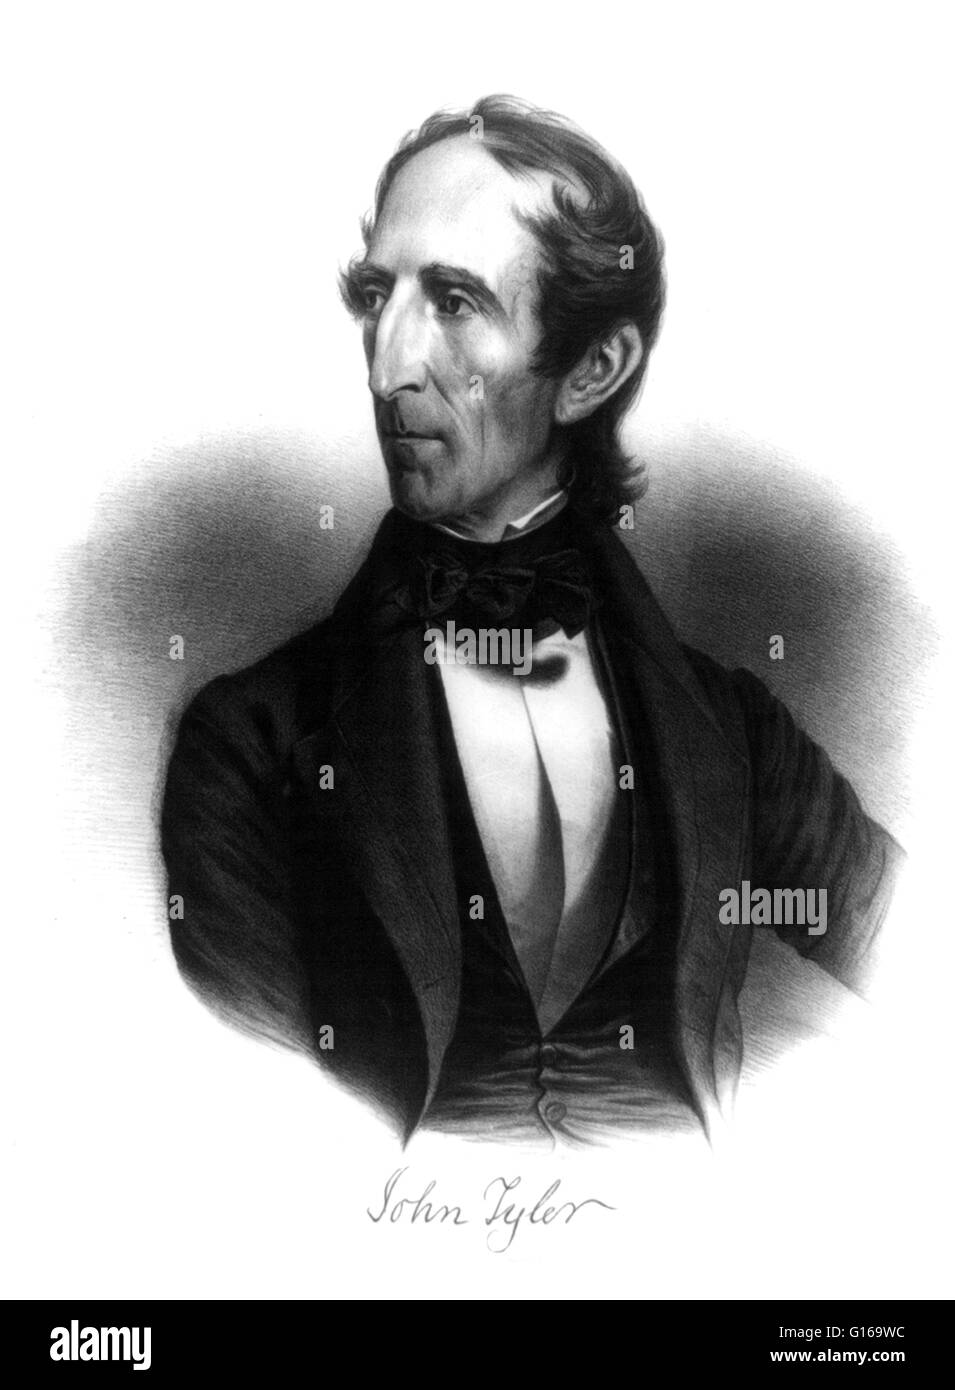 John Tyler (March 29, 1790 - January 18, 1862) was the tenth President of the United States (1841-1845). Initially a Democrat, his opposition to Andrew Jackson and Martin Van Buren led him to alliance with the Whig Party. A native of Virginia, he served a Stock Photo